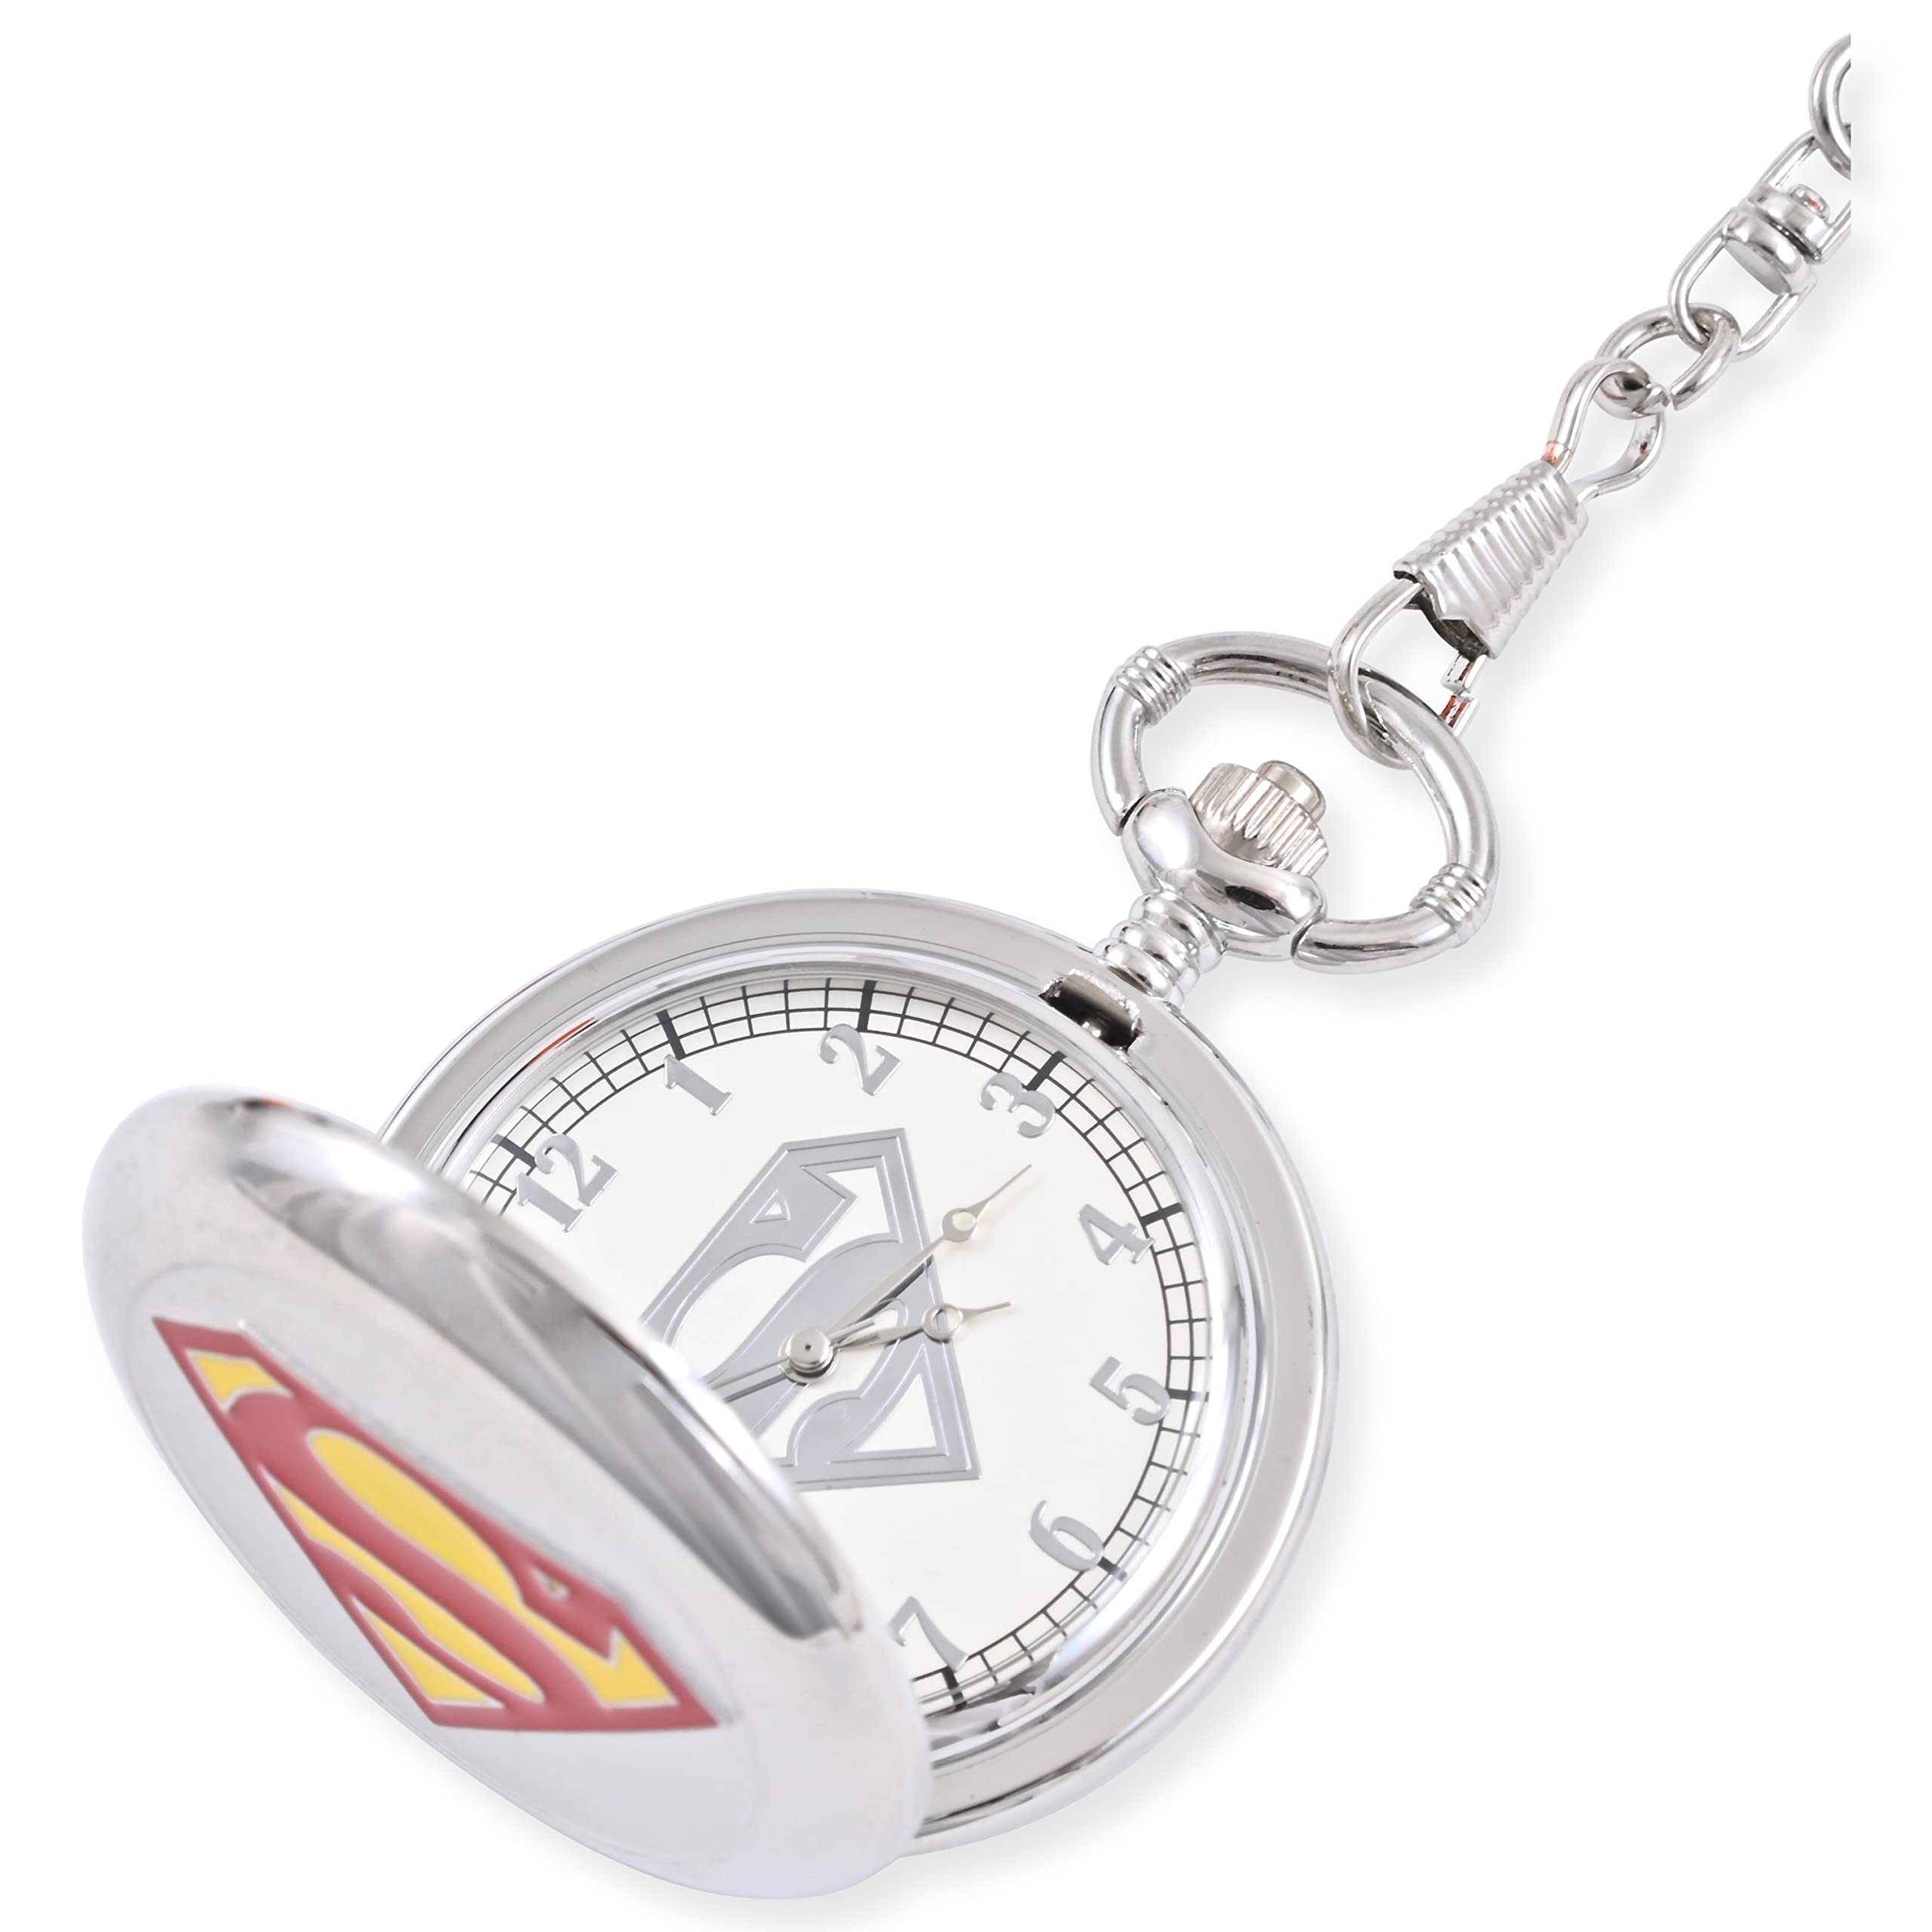 Accutime Superman Shield Analog Pocket Watch for Men - Silver Color On Cover, Pocket Watch, Male, Analog Watch (Model: SUP3073AZ)